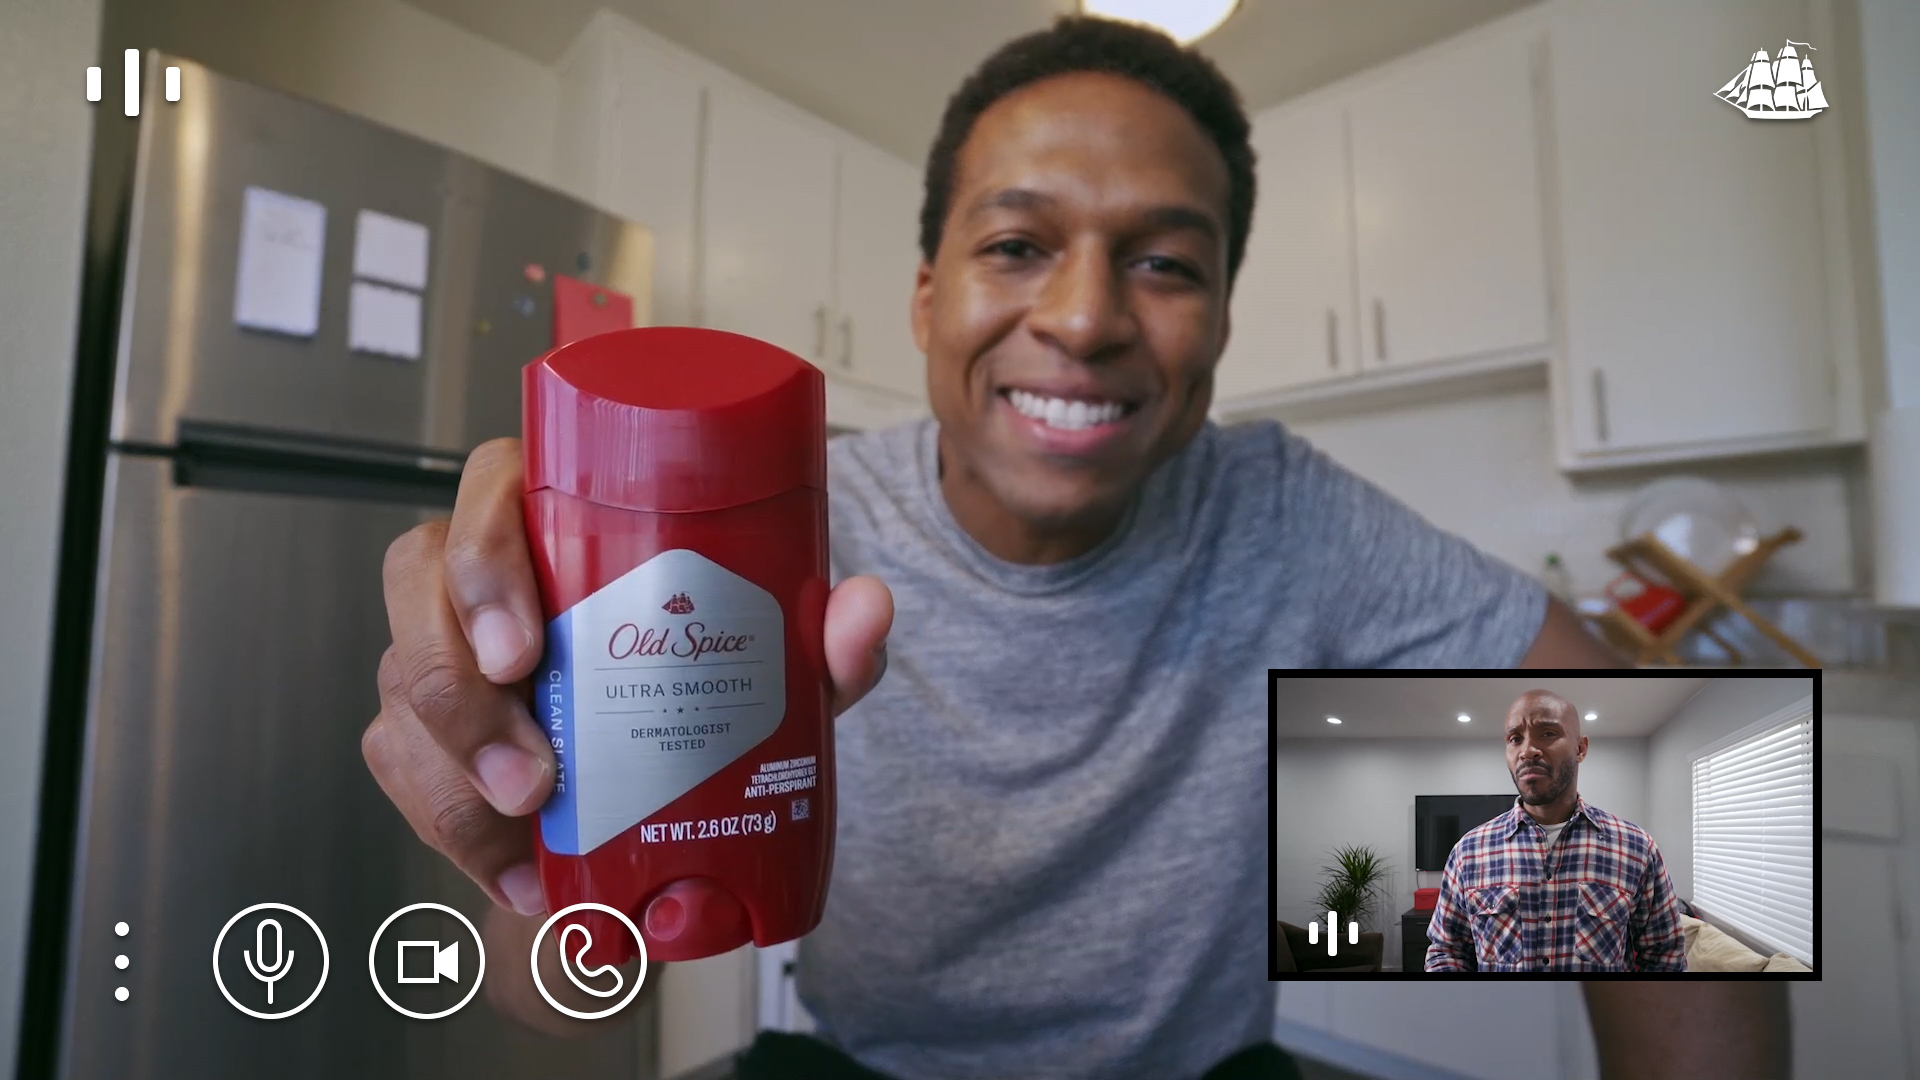 This “Pretty Good ‘ Father ‘s Day Gift Brought This Dad To Tears – Old Spice Promotions